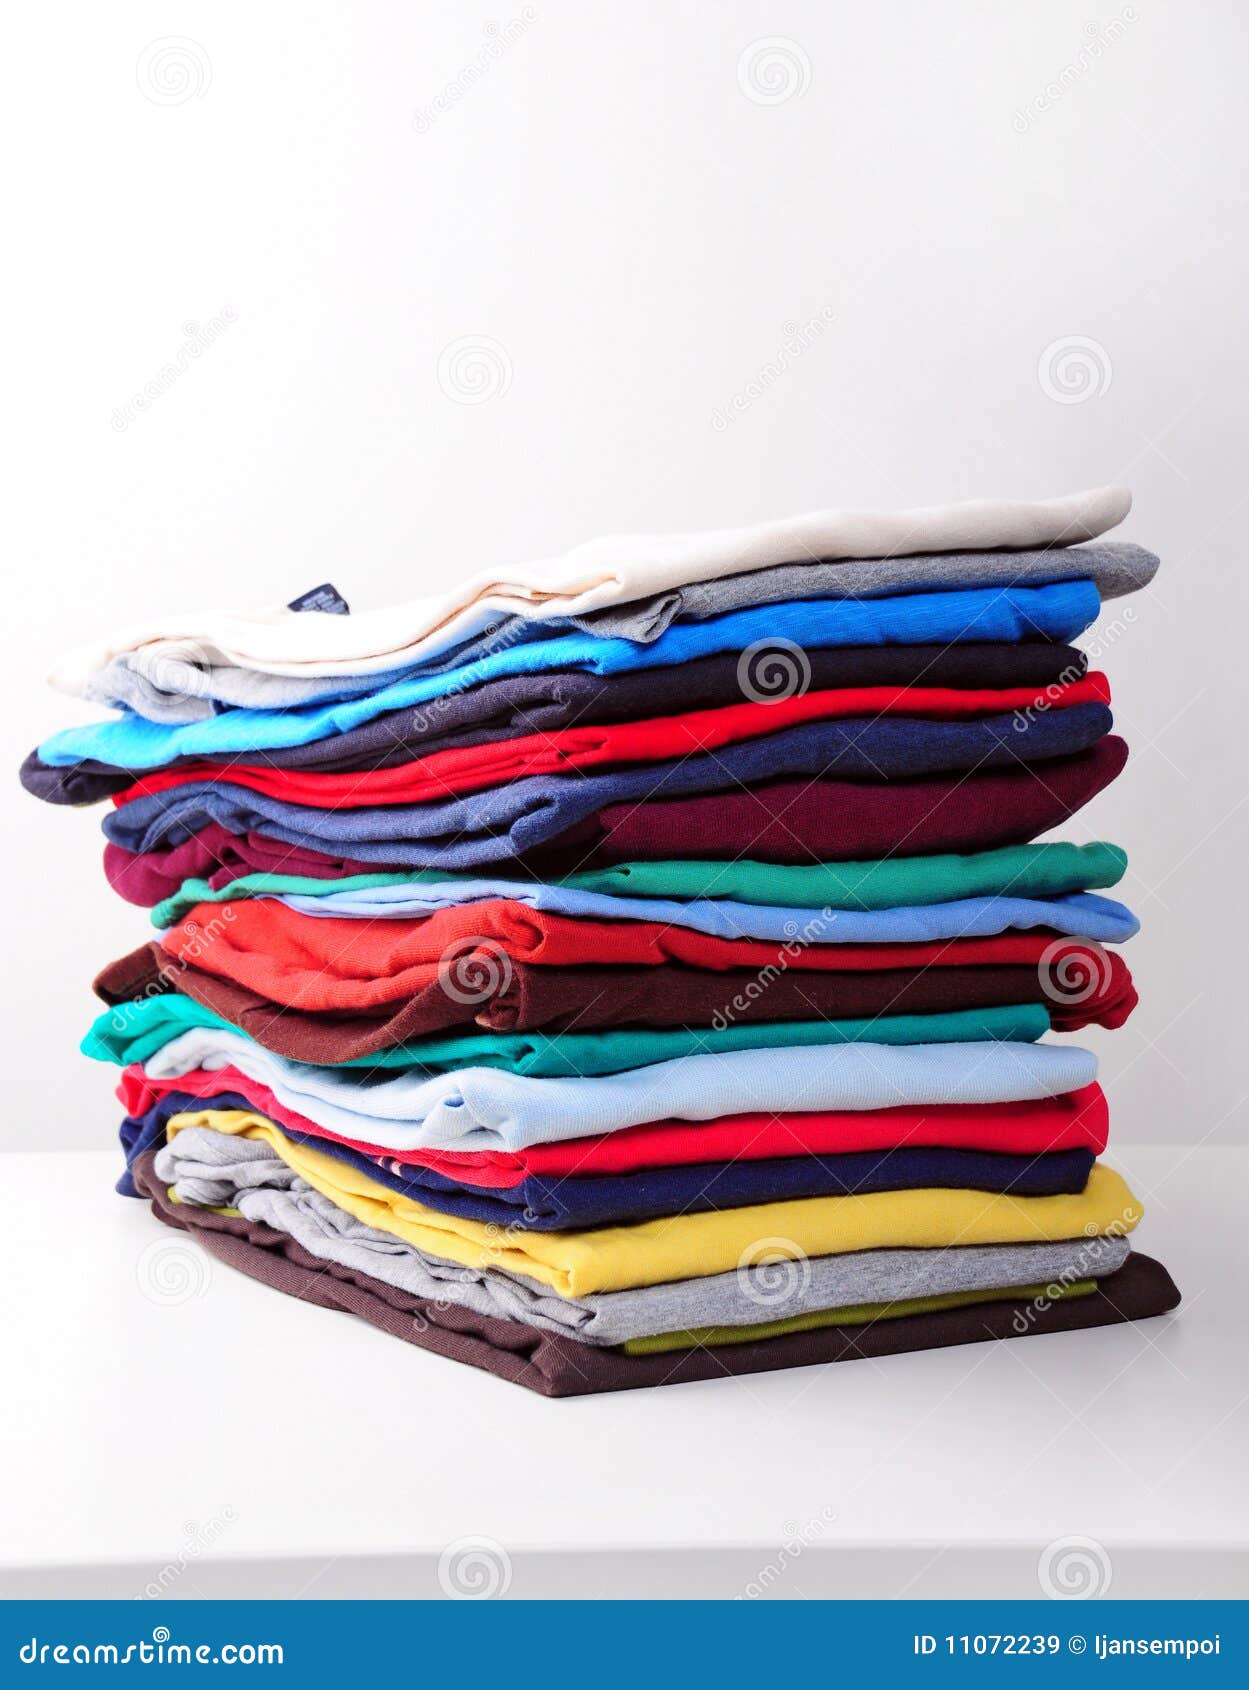 https://thumbs.dreamstime.com/z/stack-clothes-11072239.jpg